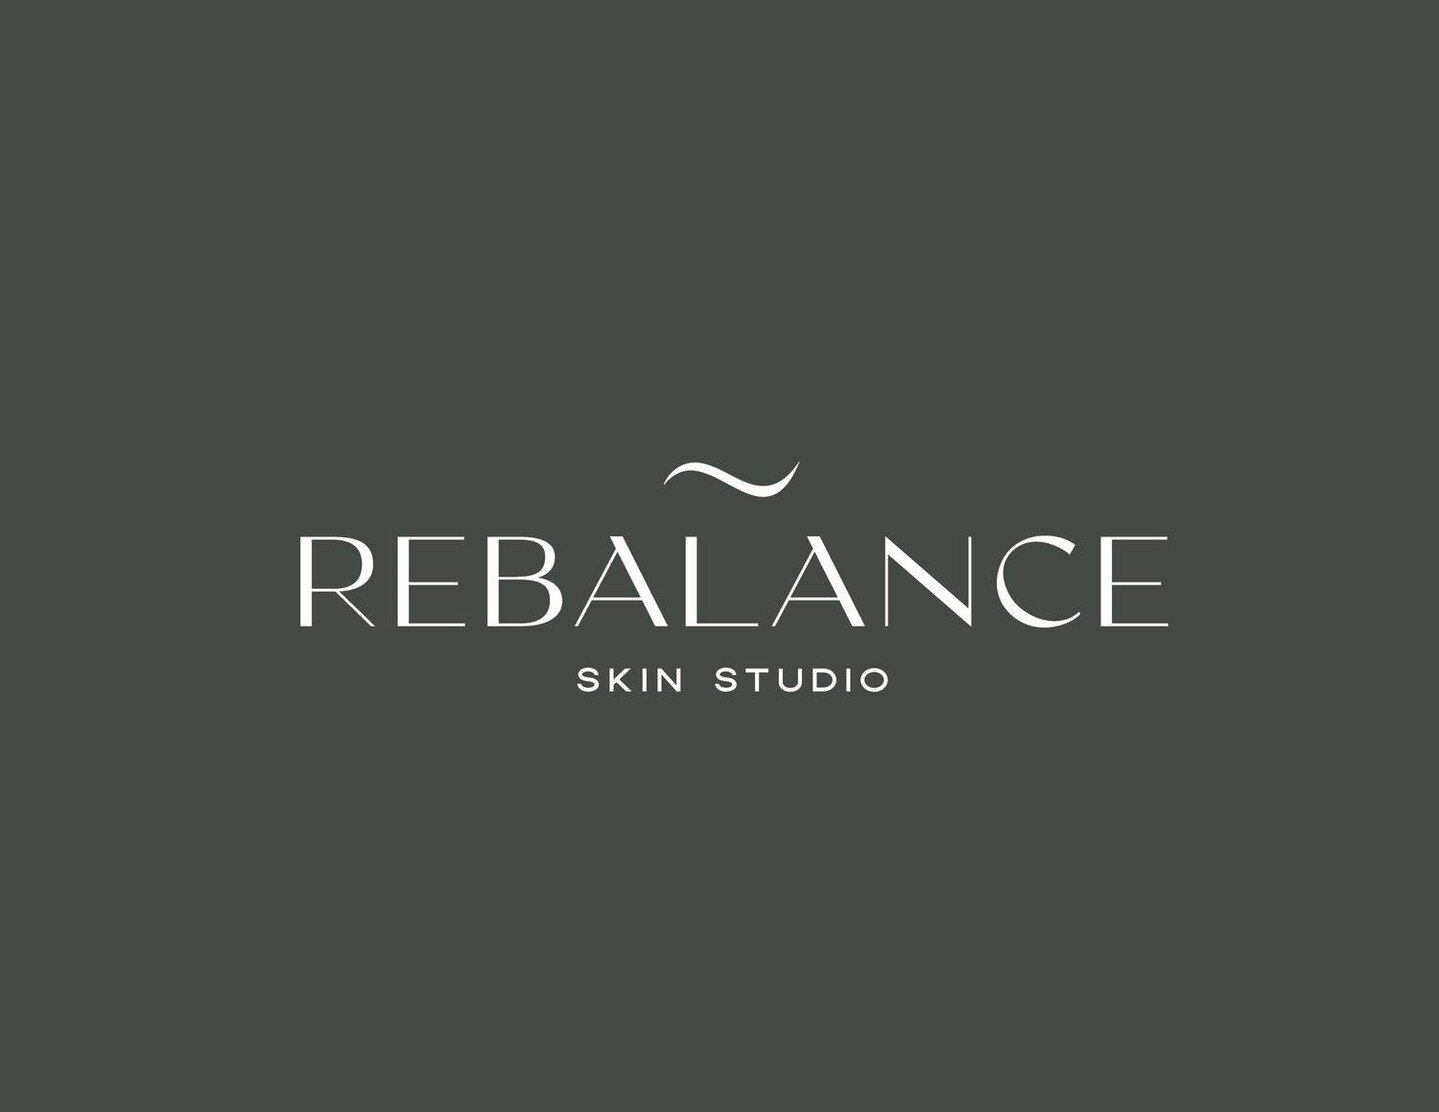 Rebalance is a skincare and aesthetics company by Alexis Kowalsky. She helps people feel more confident with her custom skincare therapeutic solutions and custom facials. At Theiarts Design, we created a brand that reflects Rebalance&rsquo;s unique p